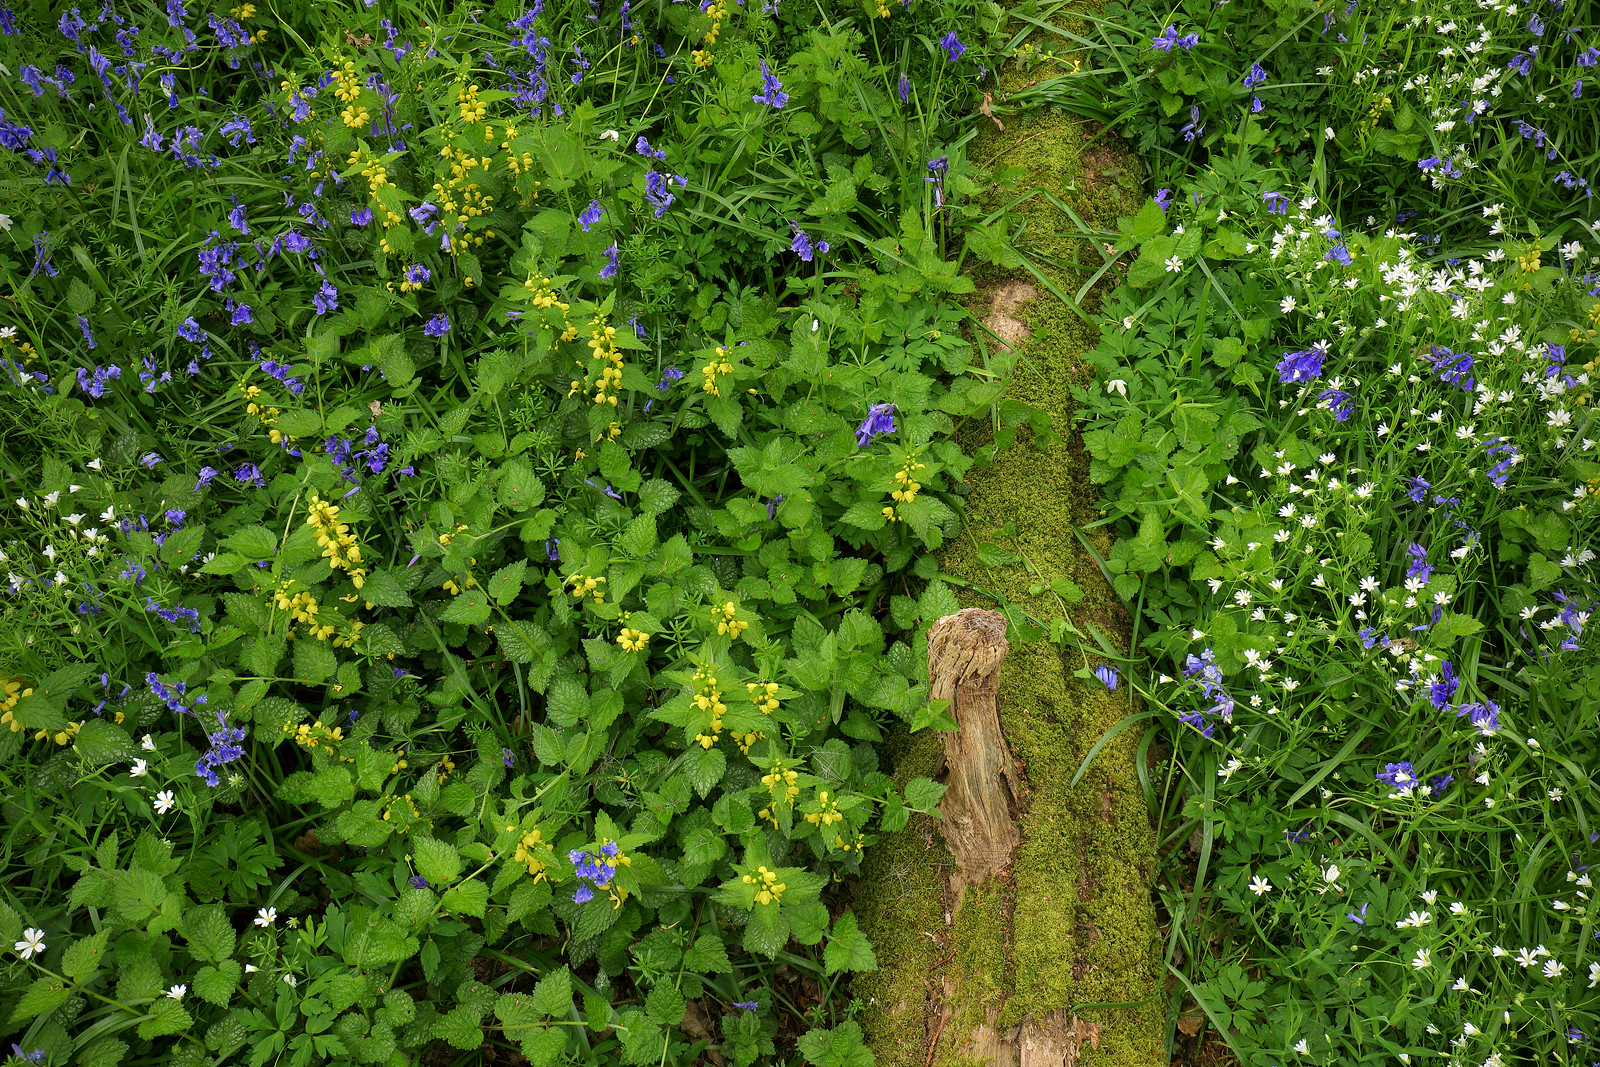 Bluebells, Yellow Archangels and Anemones